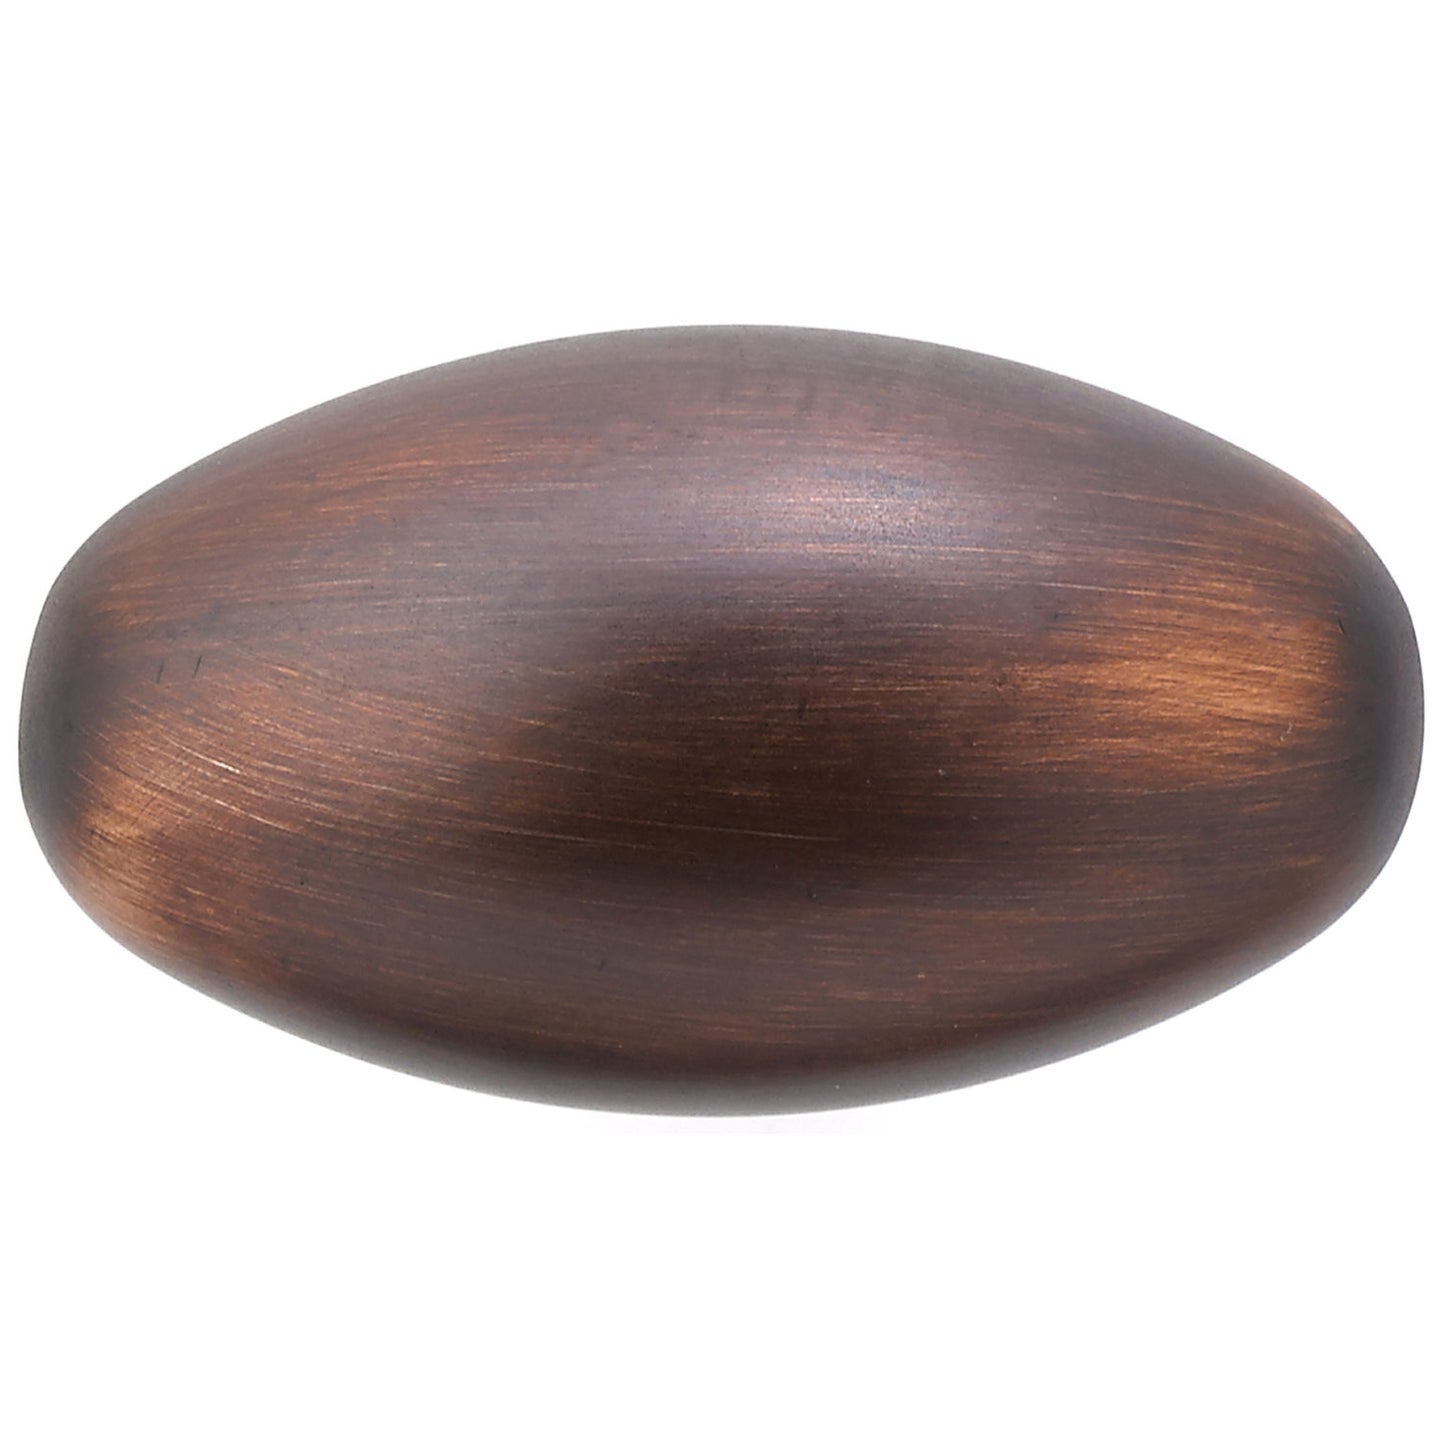 Traditional Knob, 1-31/32" x 1-3/32", Brushed Oil-Rubbed Bronze alt 0